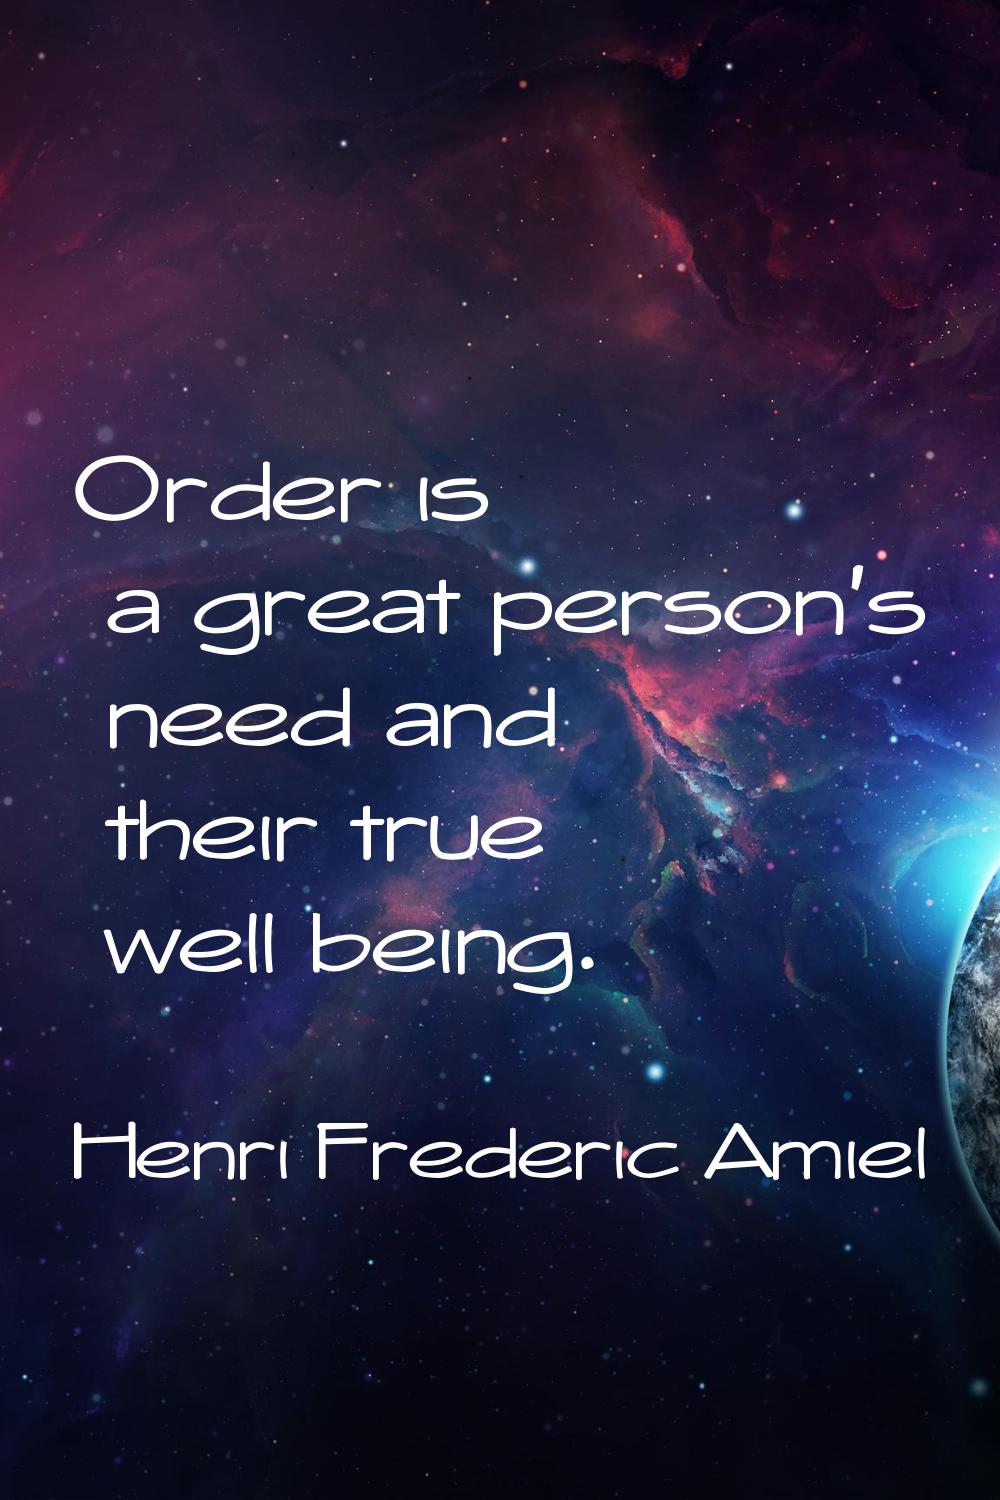 Order is a great person's need and their true well being.